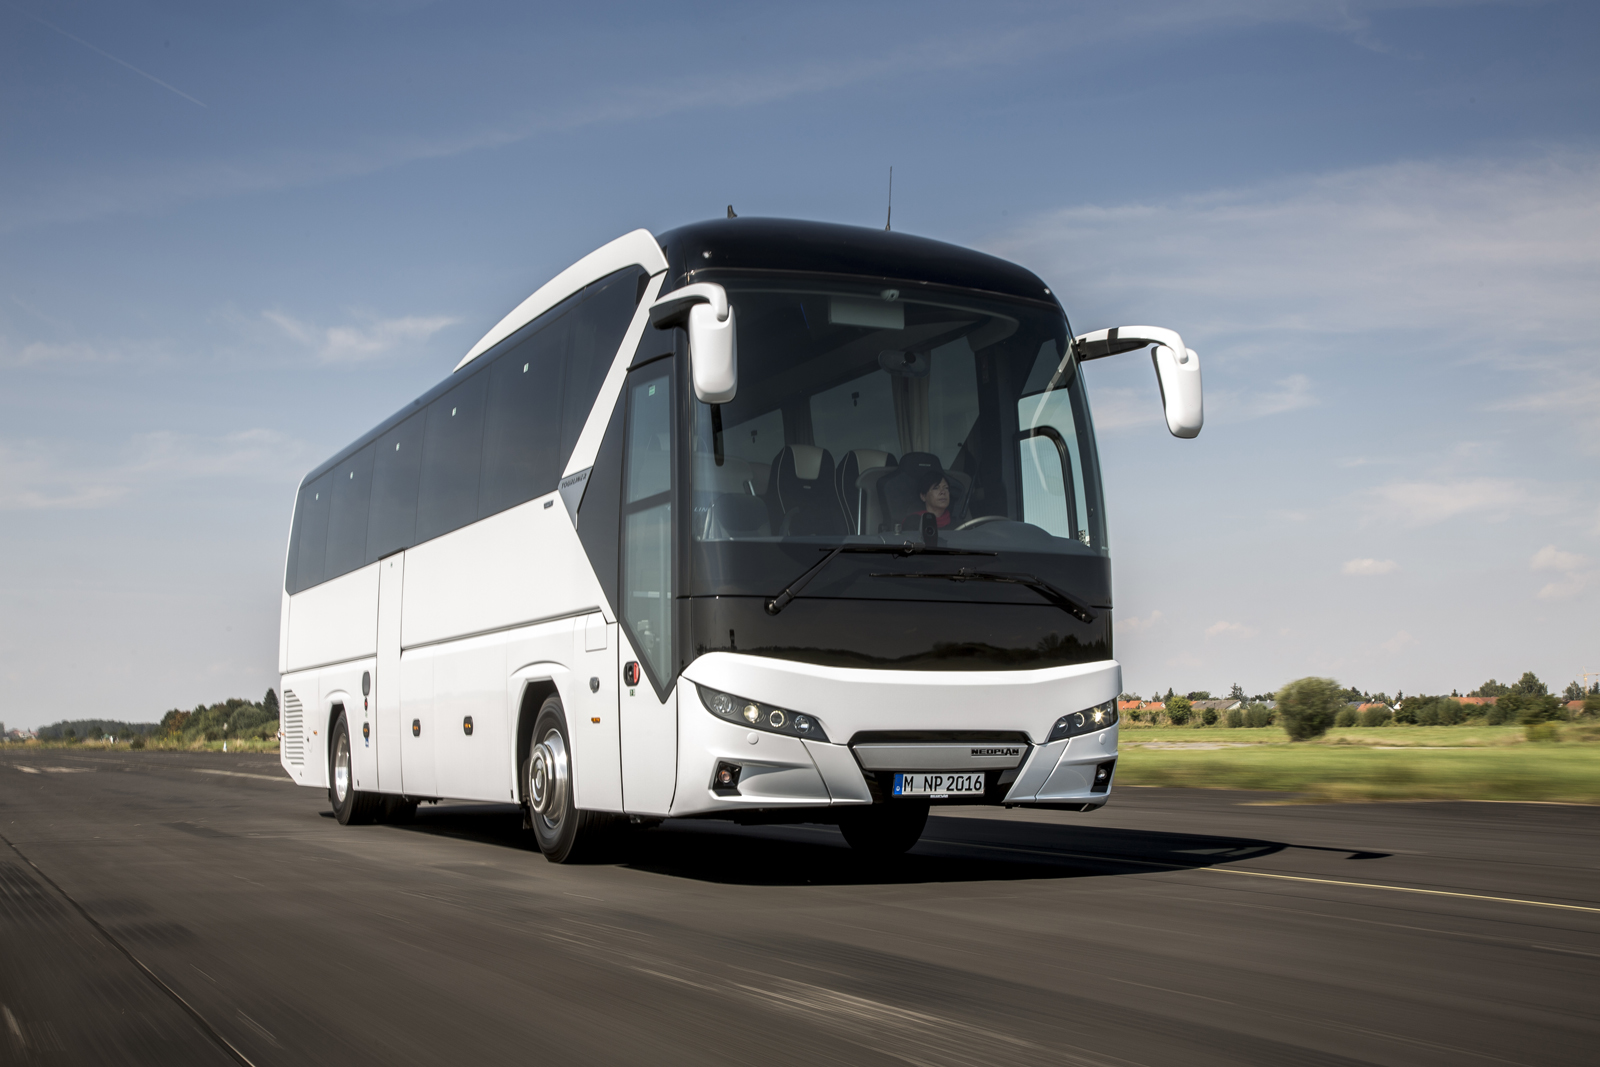 In visual terms the new NEOPLAN Tourliner is clearly a member of the NEOPLAN family. DE: Der neue NEOPLAN Tourliner reiht sich optisch klar in die NEOPLAN-Familie ein. UK: In visual terms the new NEOPLAN Tourliner is clearly a member of the NEOPLAN family.